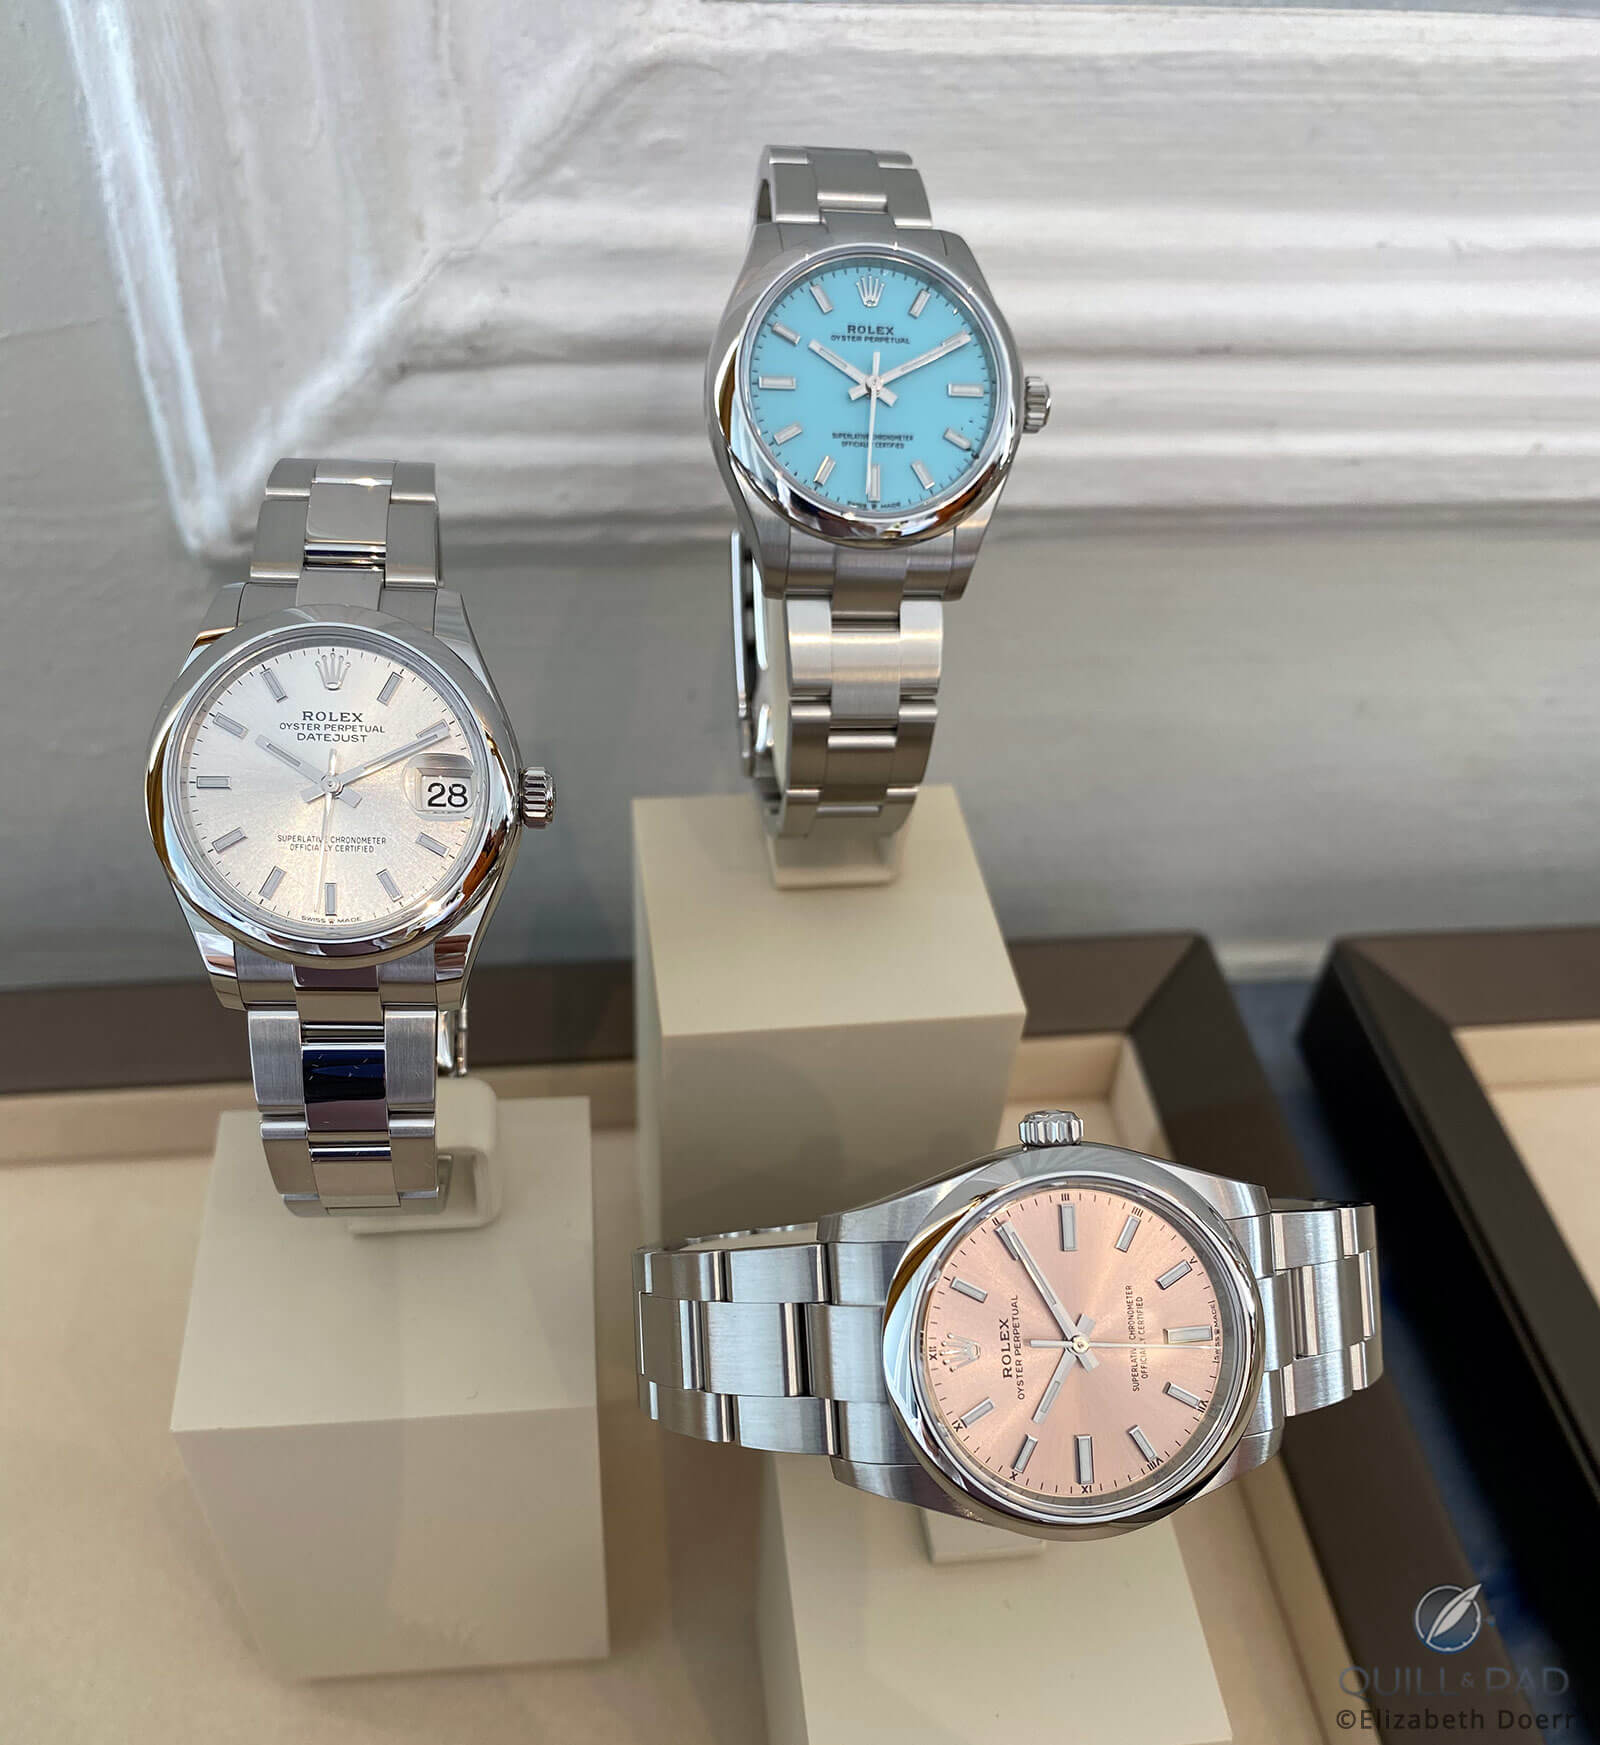 Rolex Releases New Oyster Perpetual Watches With 'Celebration